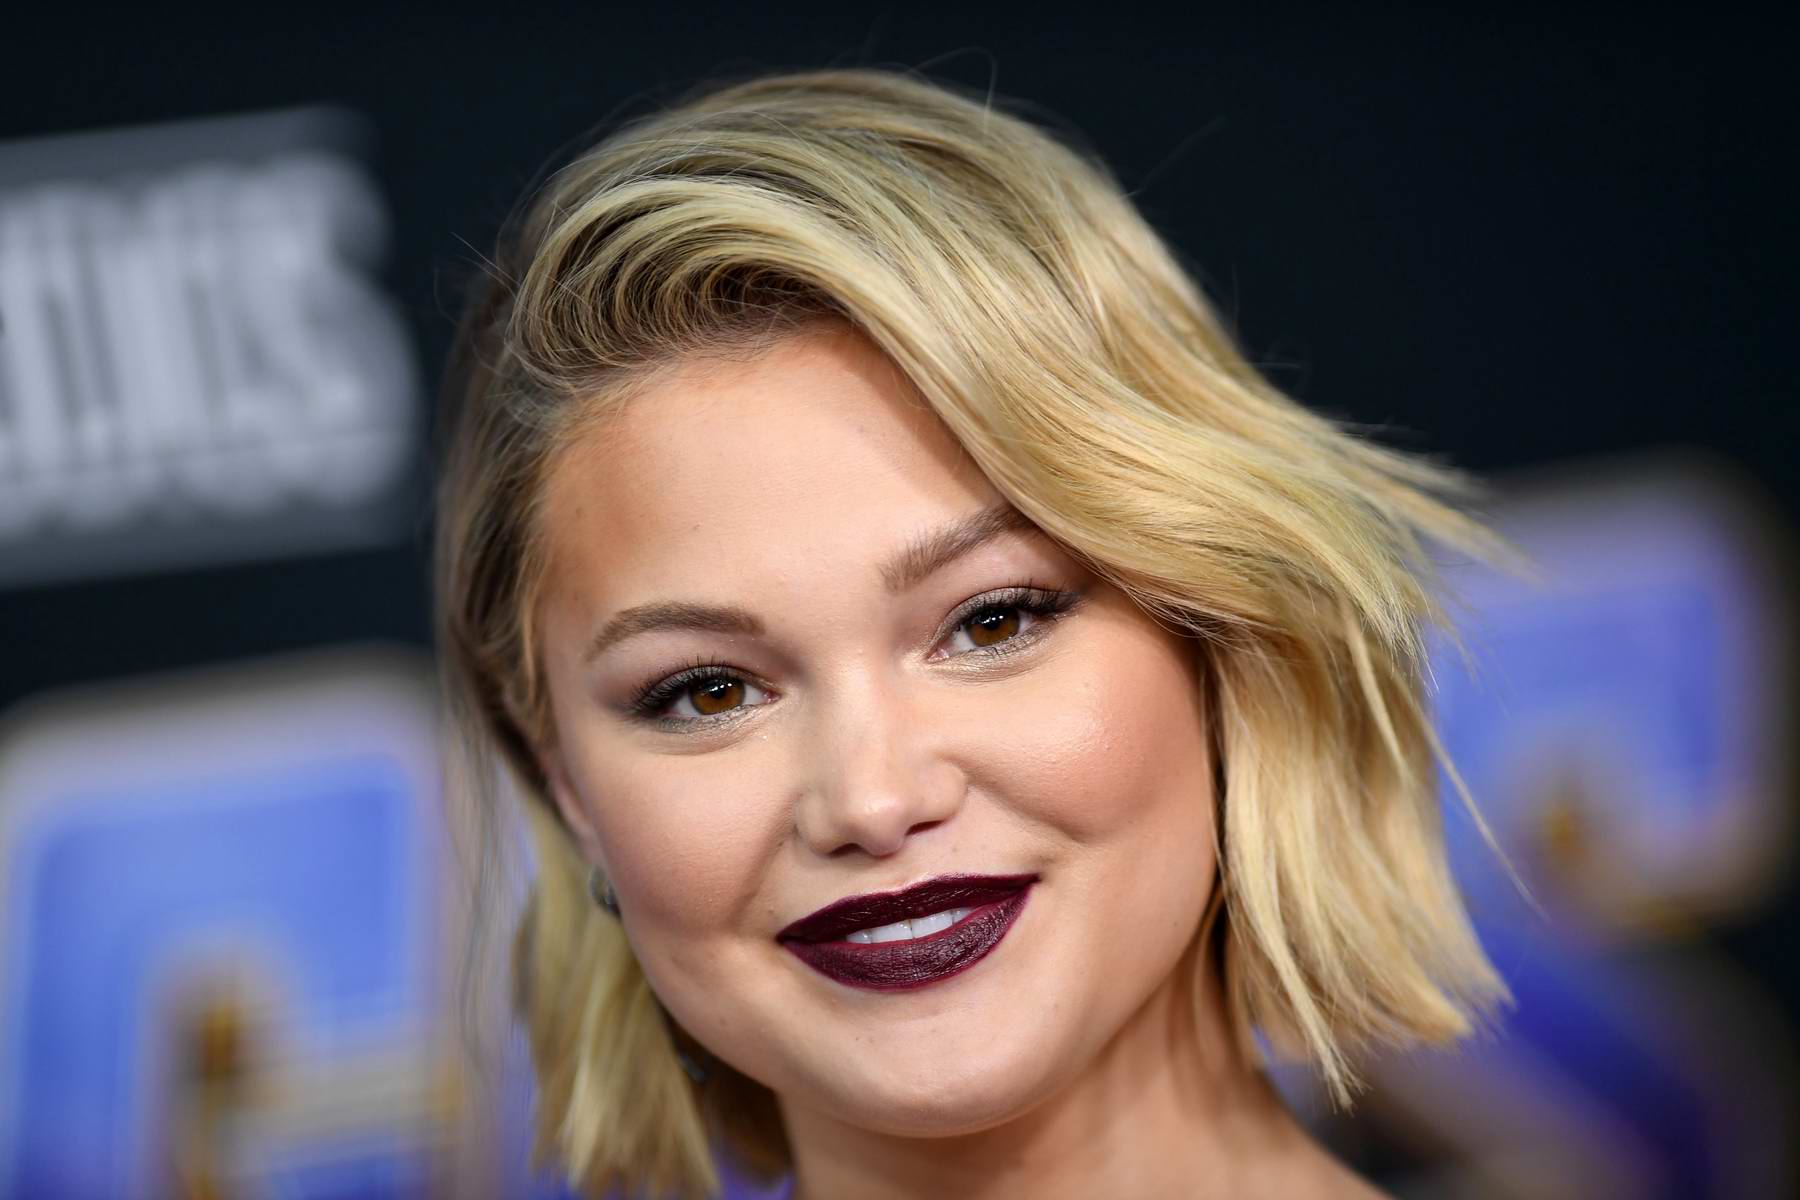 olivia holt attends the world premiere of 'avengers- endgame' at the la ...